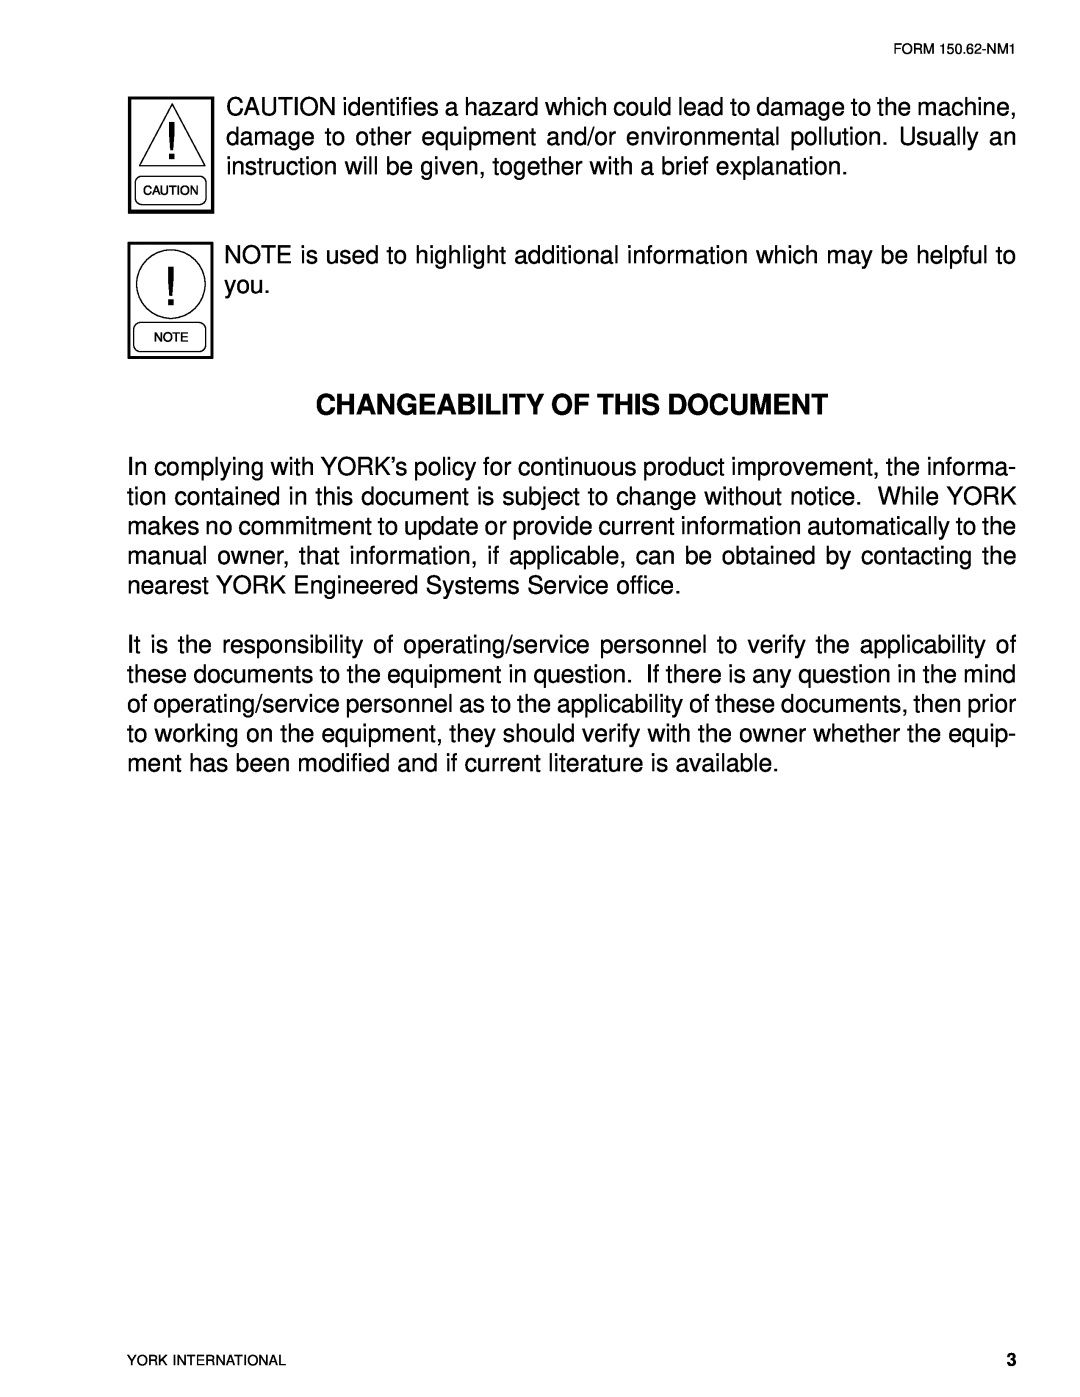 York YCAL0080SC, YCAL0014SC manual Changeability Of This Document, FORM 150.62-NM1, York International 